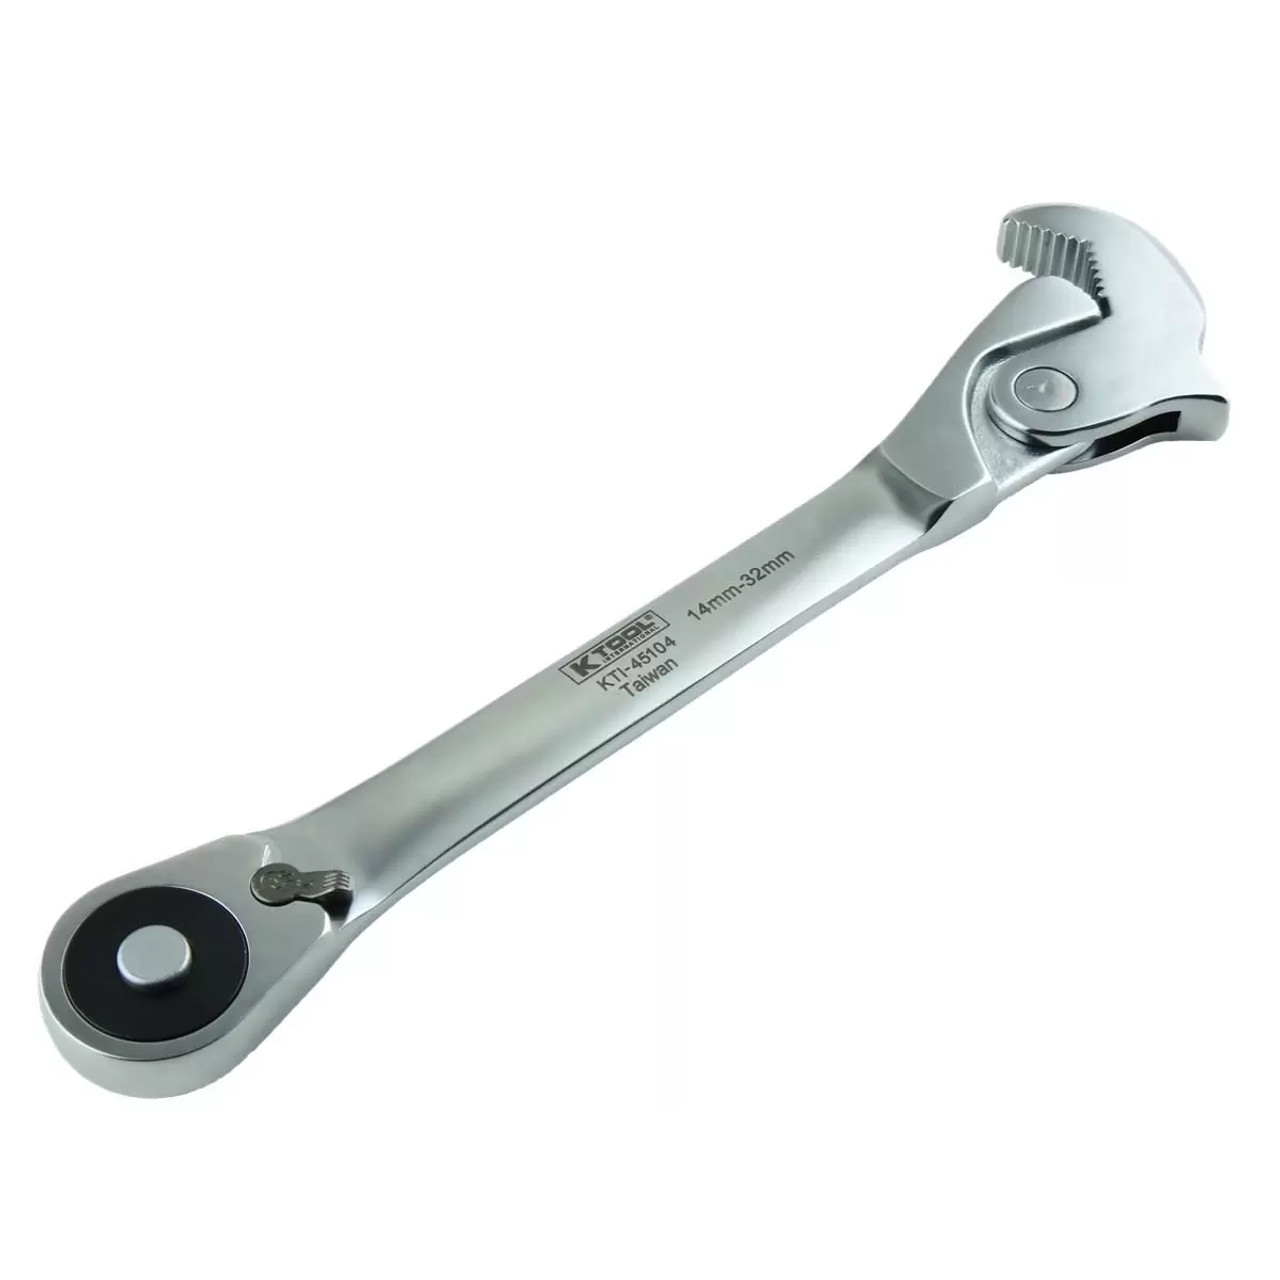 Wrench Eagle Head 1/2 Dr 14-32mm